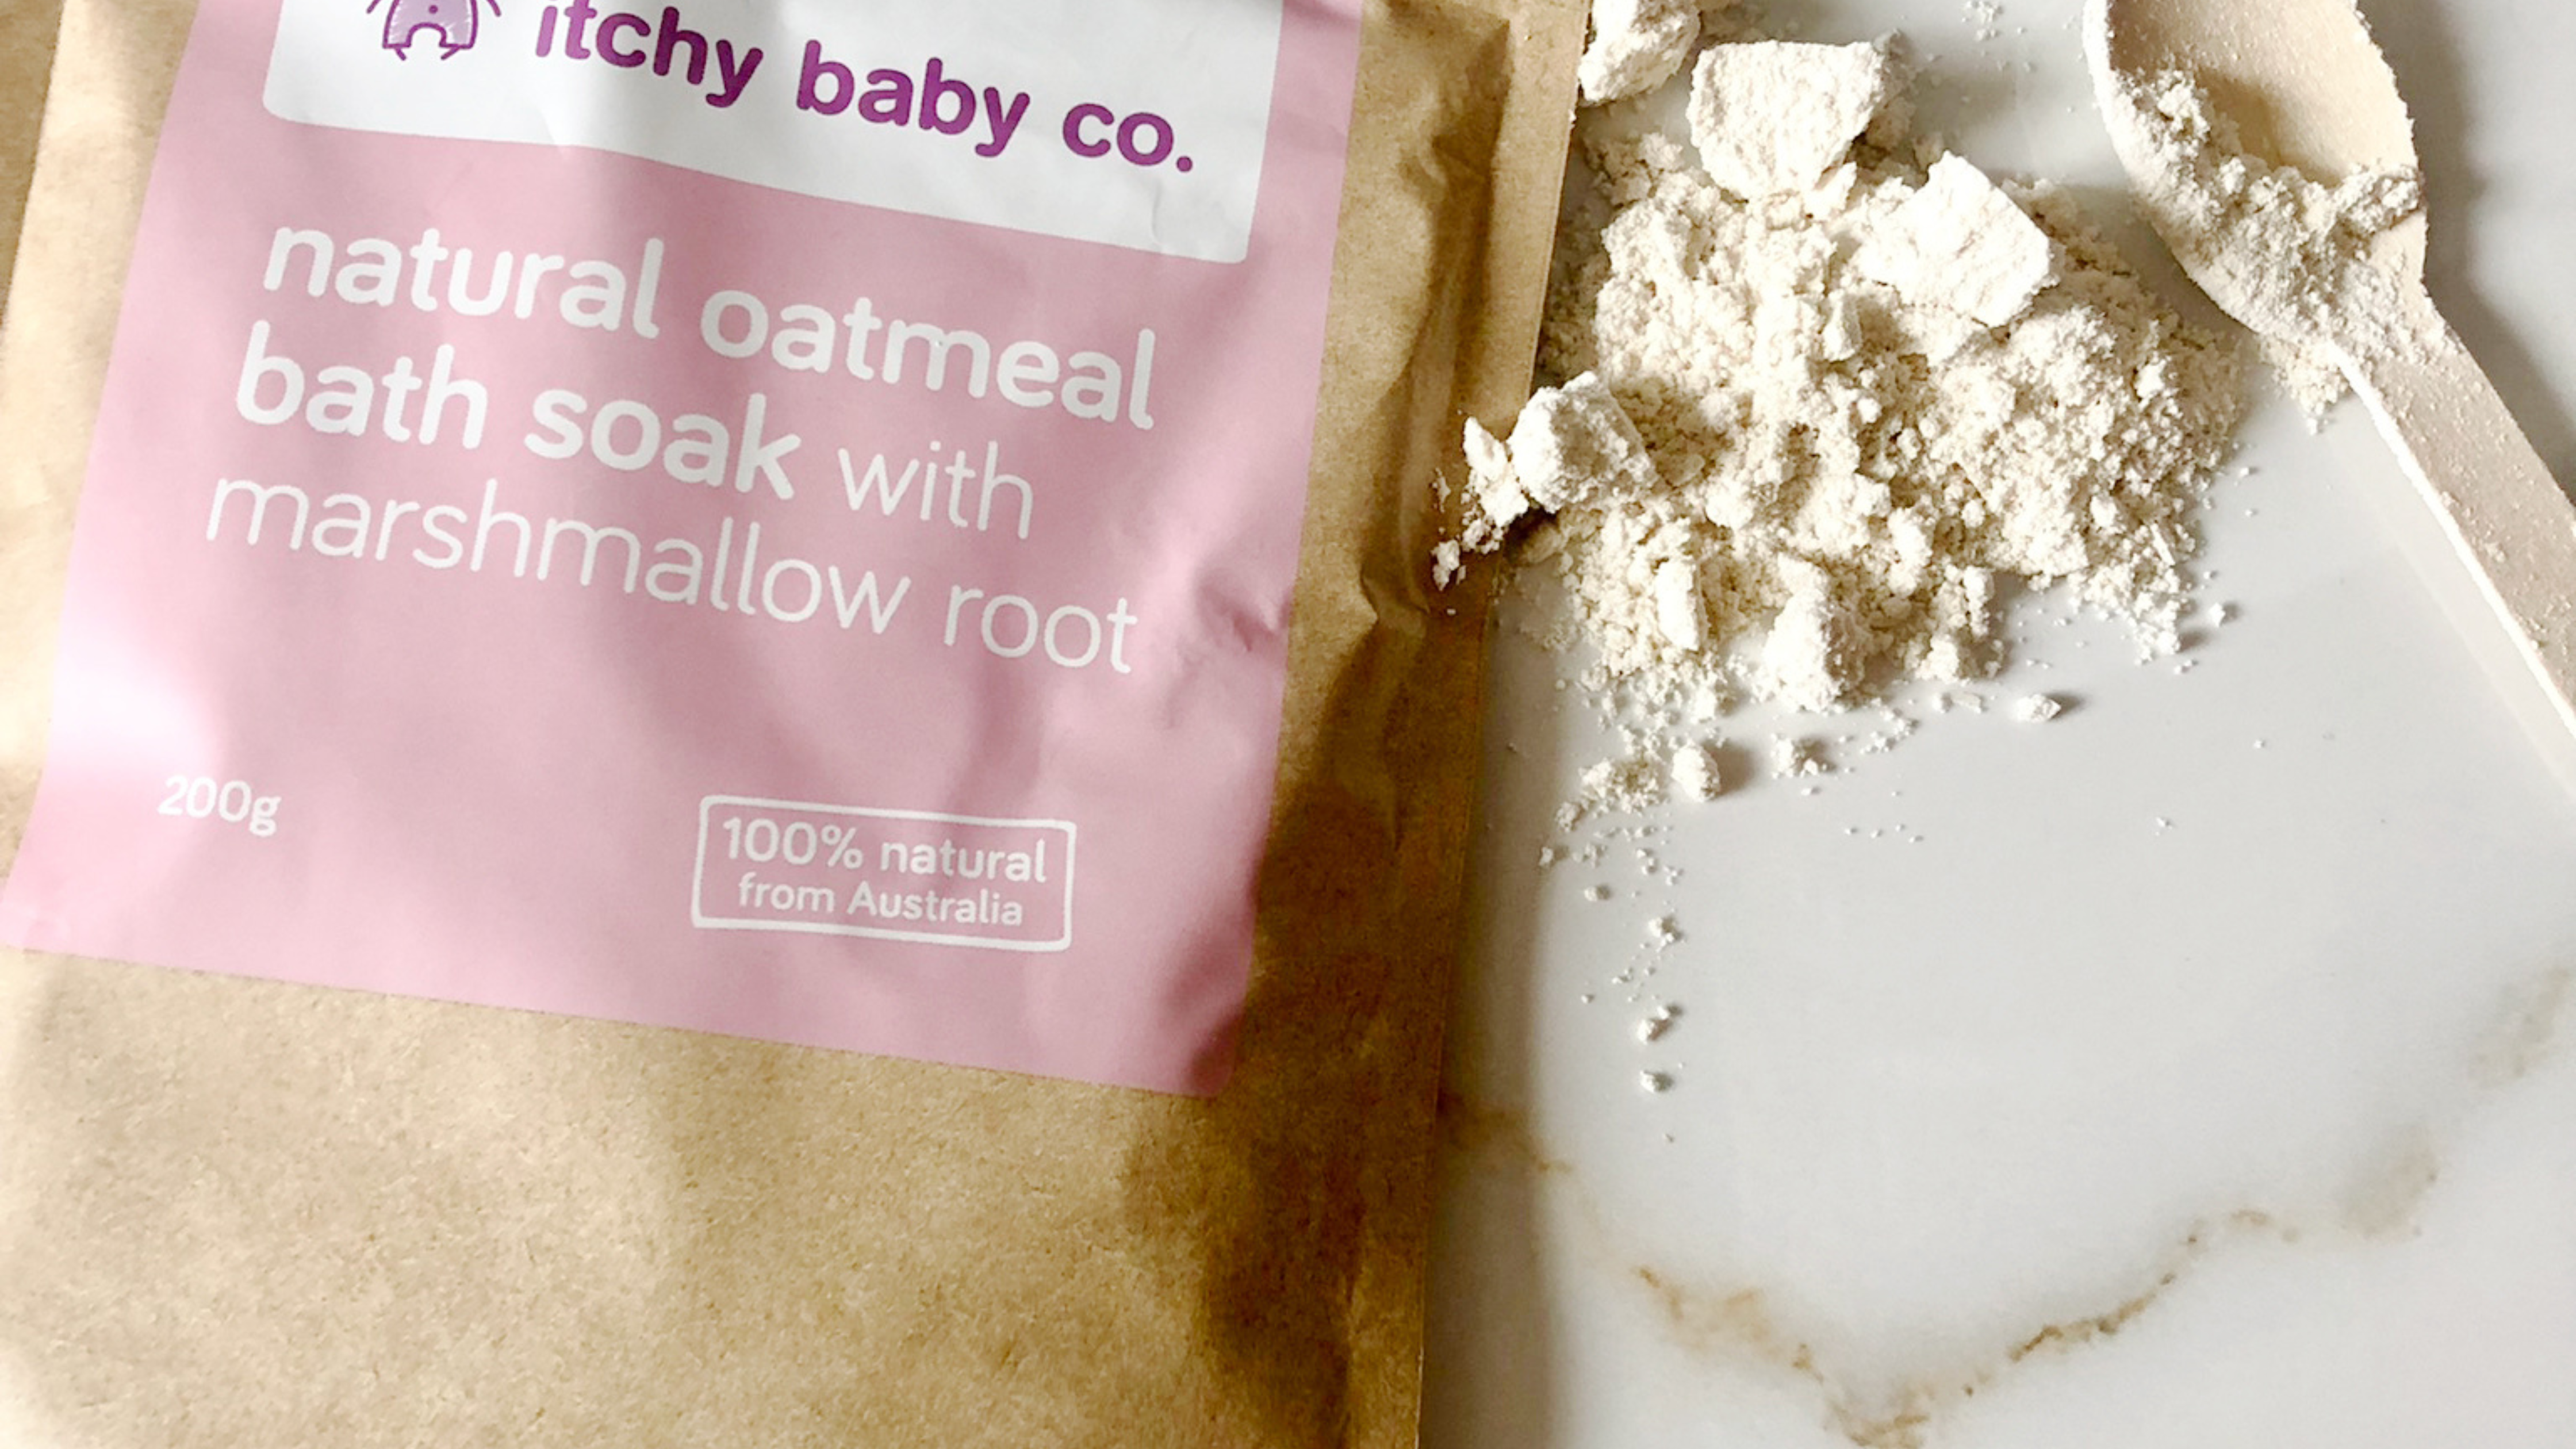 The Benefits of Colloidal Oatmeal for Eczema-Prone Skin